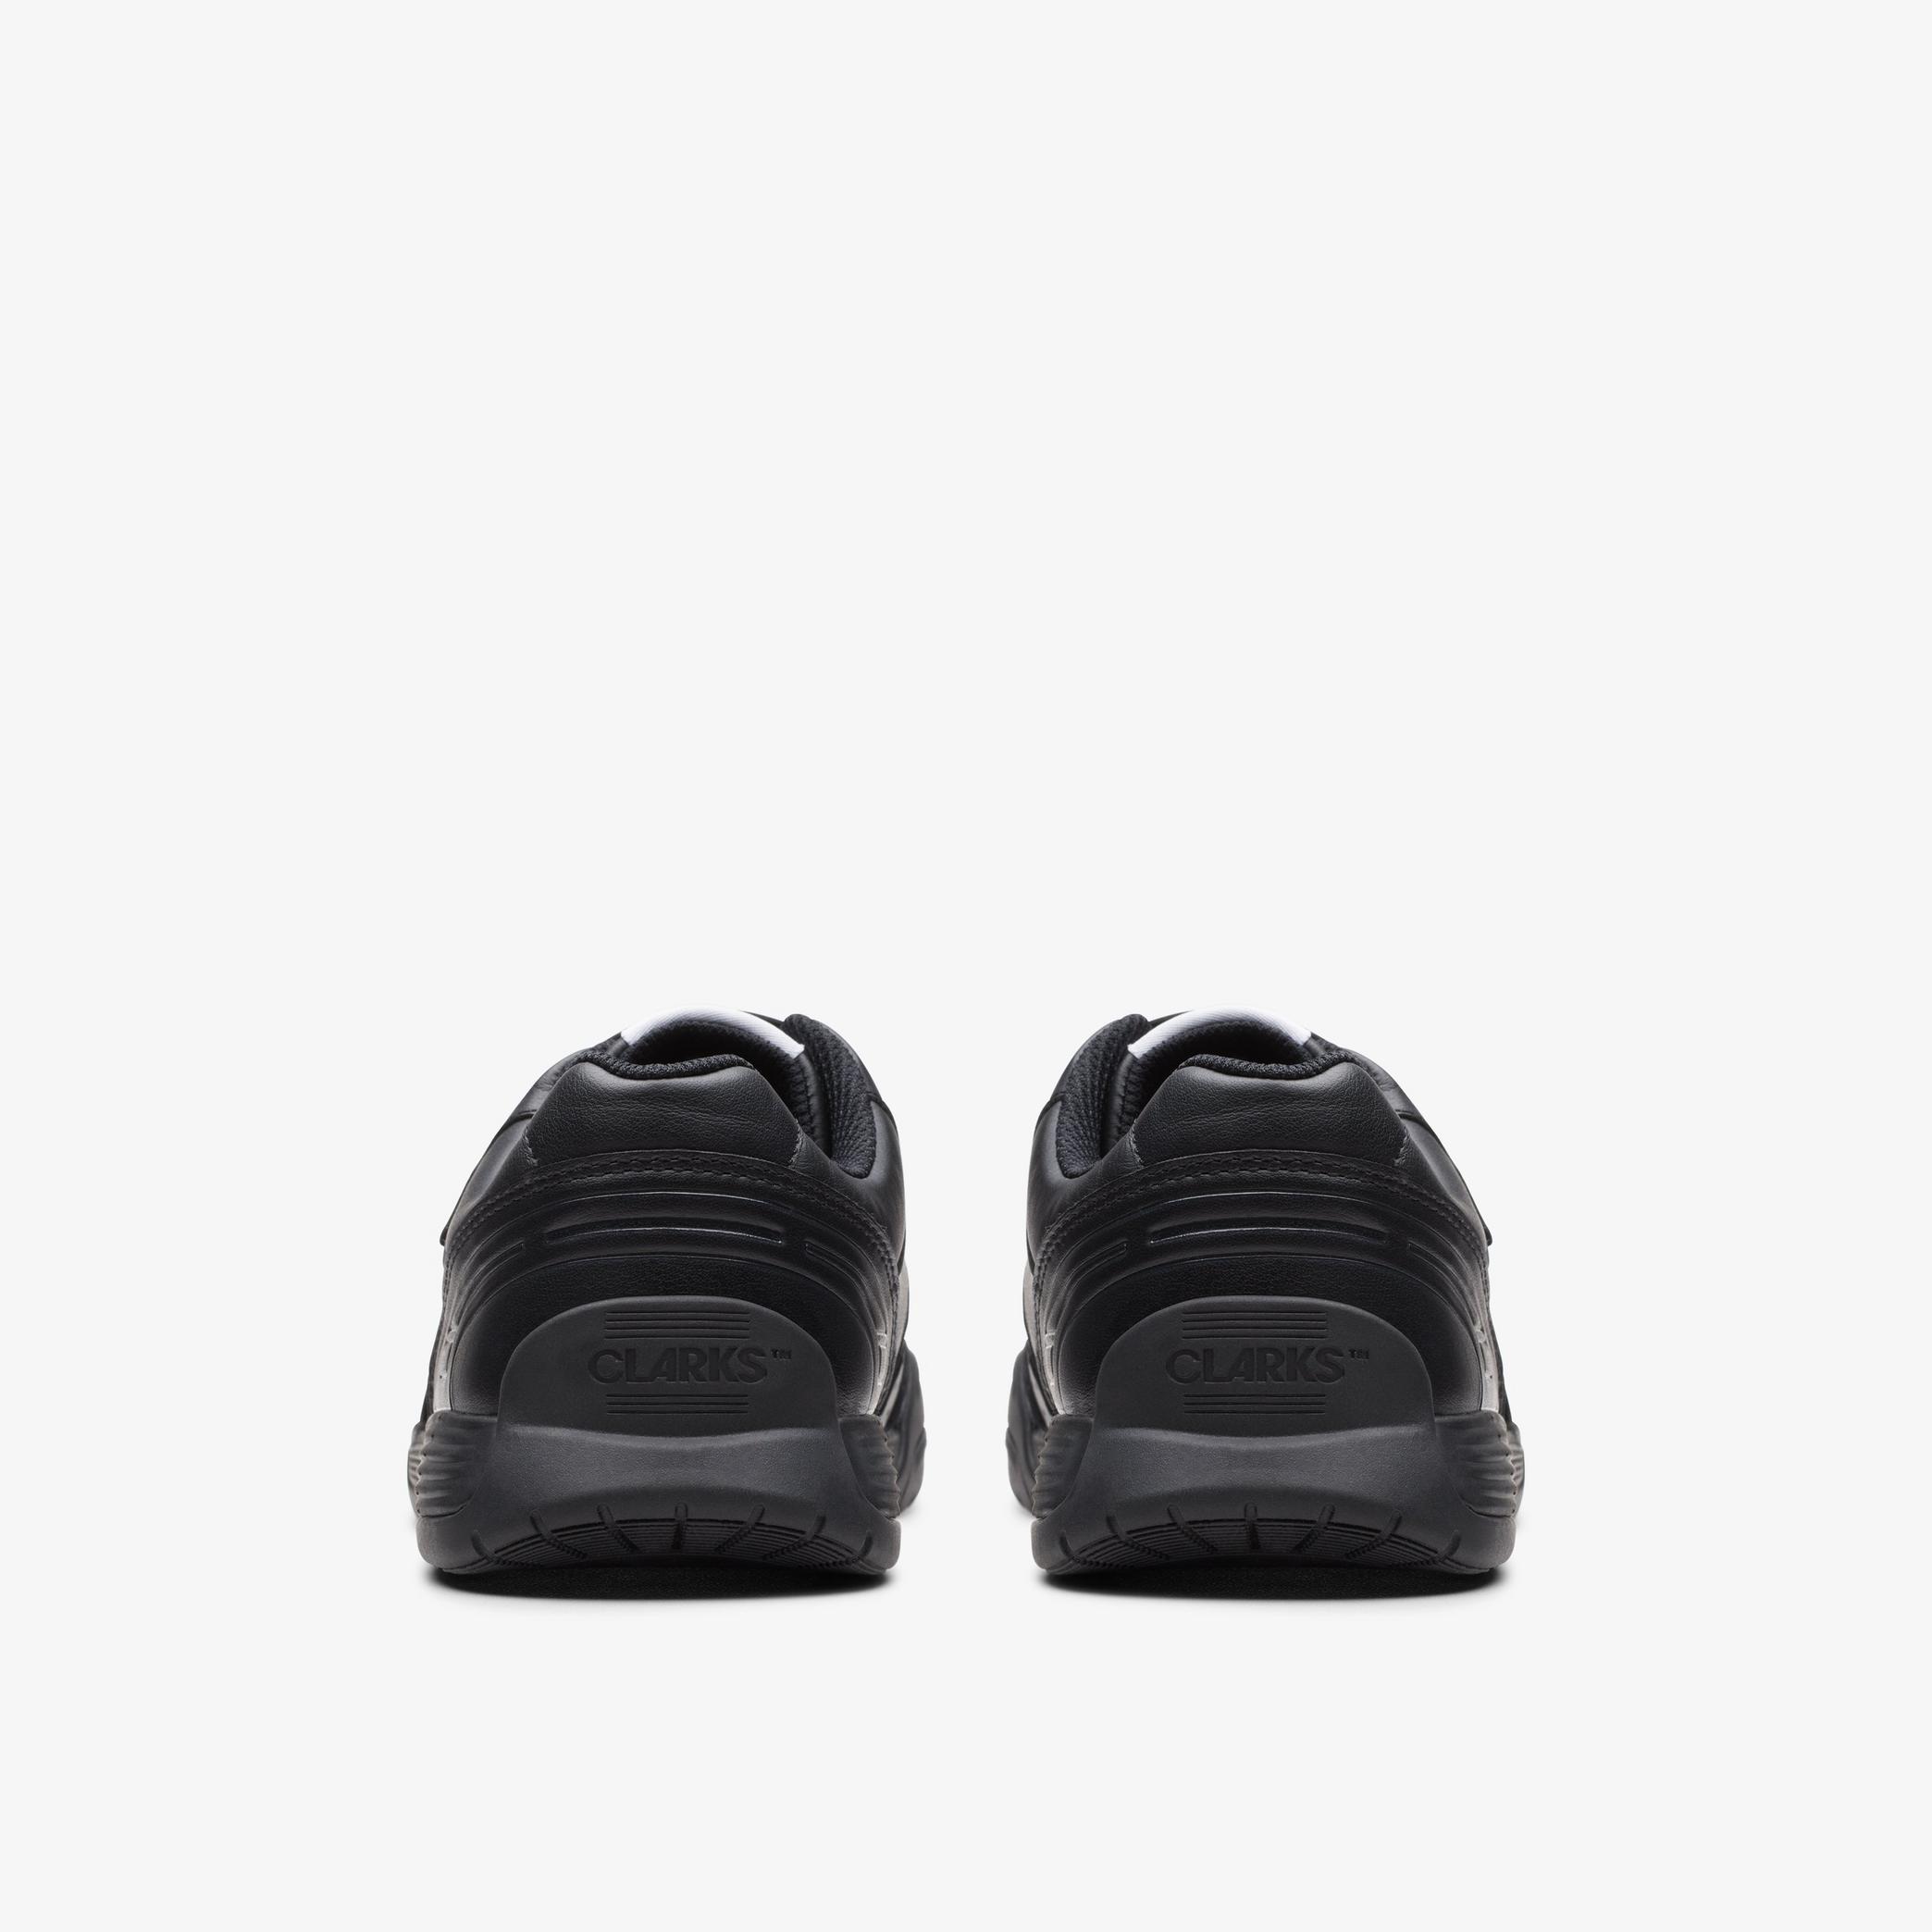 BOYS CICA Star Orb Youth Black Trainers | Clarks UK